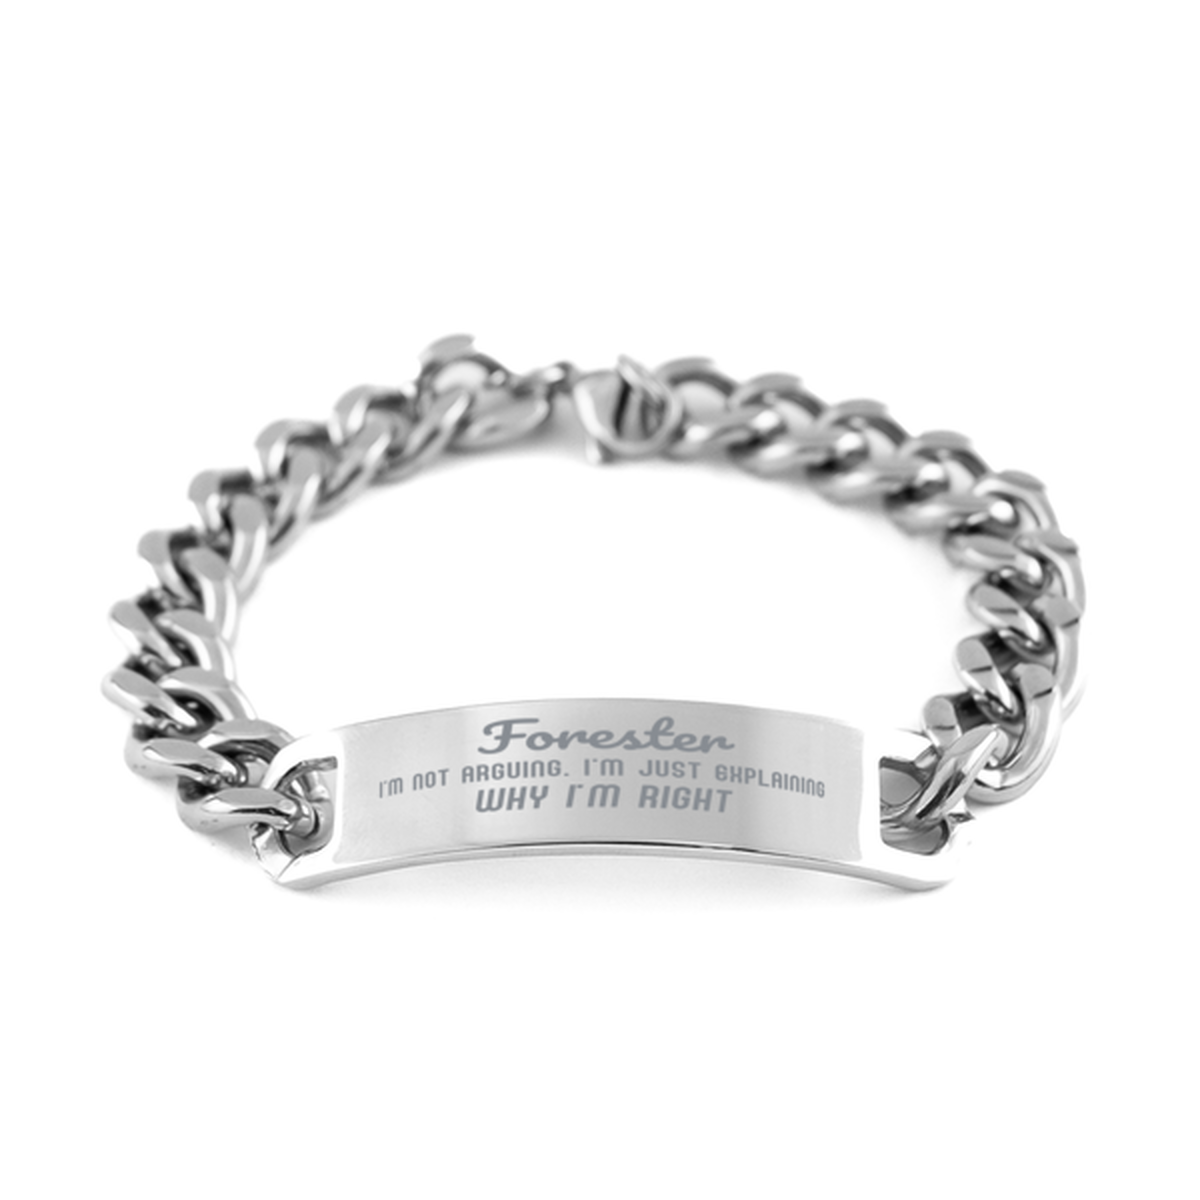 Forester I'm not Arguing. I'm Just Explaining Why I'm RIGHT Cuban Chain Stainless Steel Bracelet, Graduation Birthday Christmas Forester Gifts For Forester Funny Saying Quote Present for Men Women Coworker